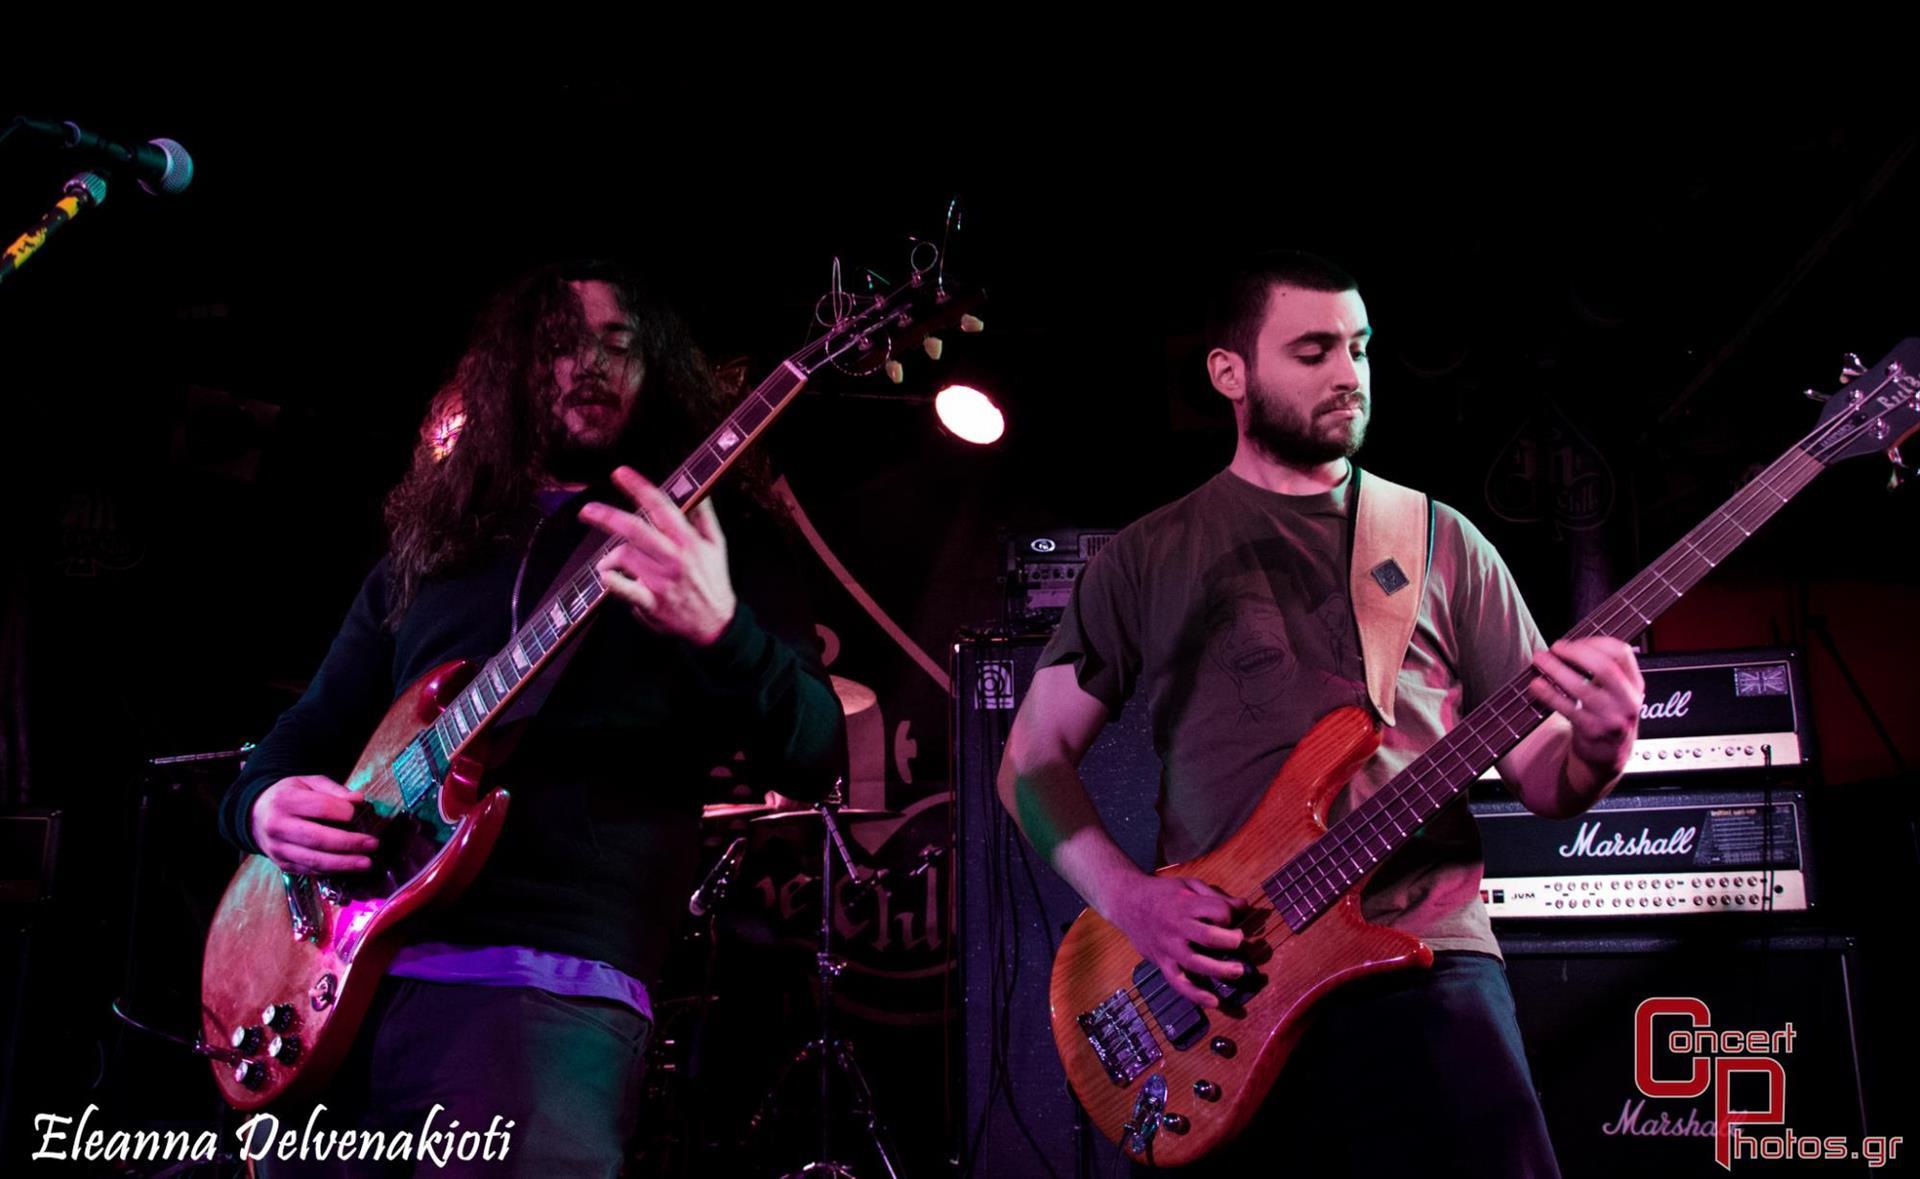 Battle Of The Bands Athens - Leg 4-test photographer:  - Battle Of The Bands-20150208-221634